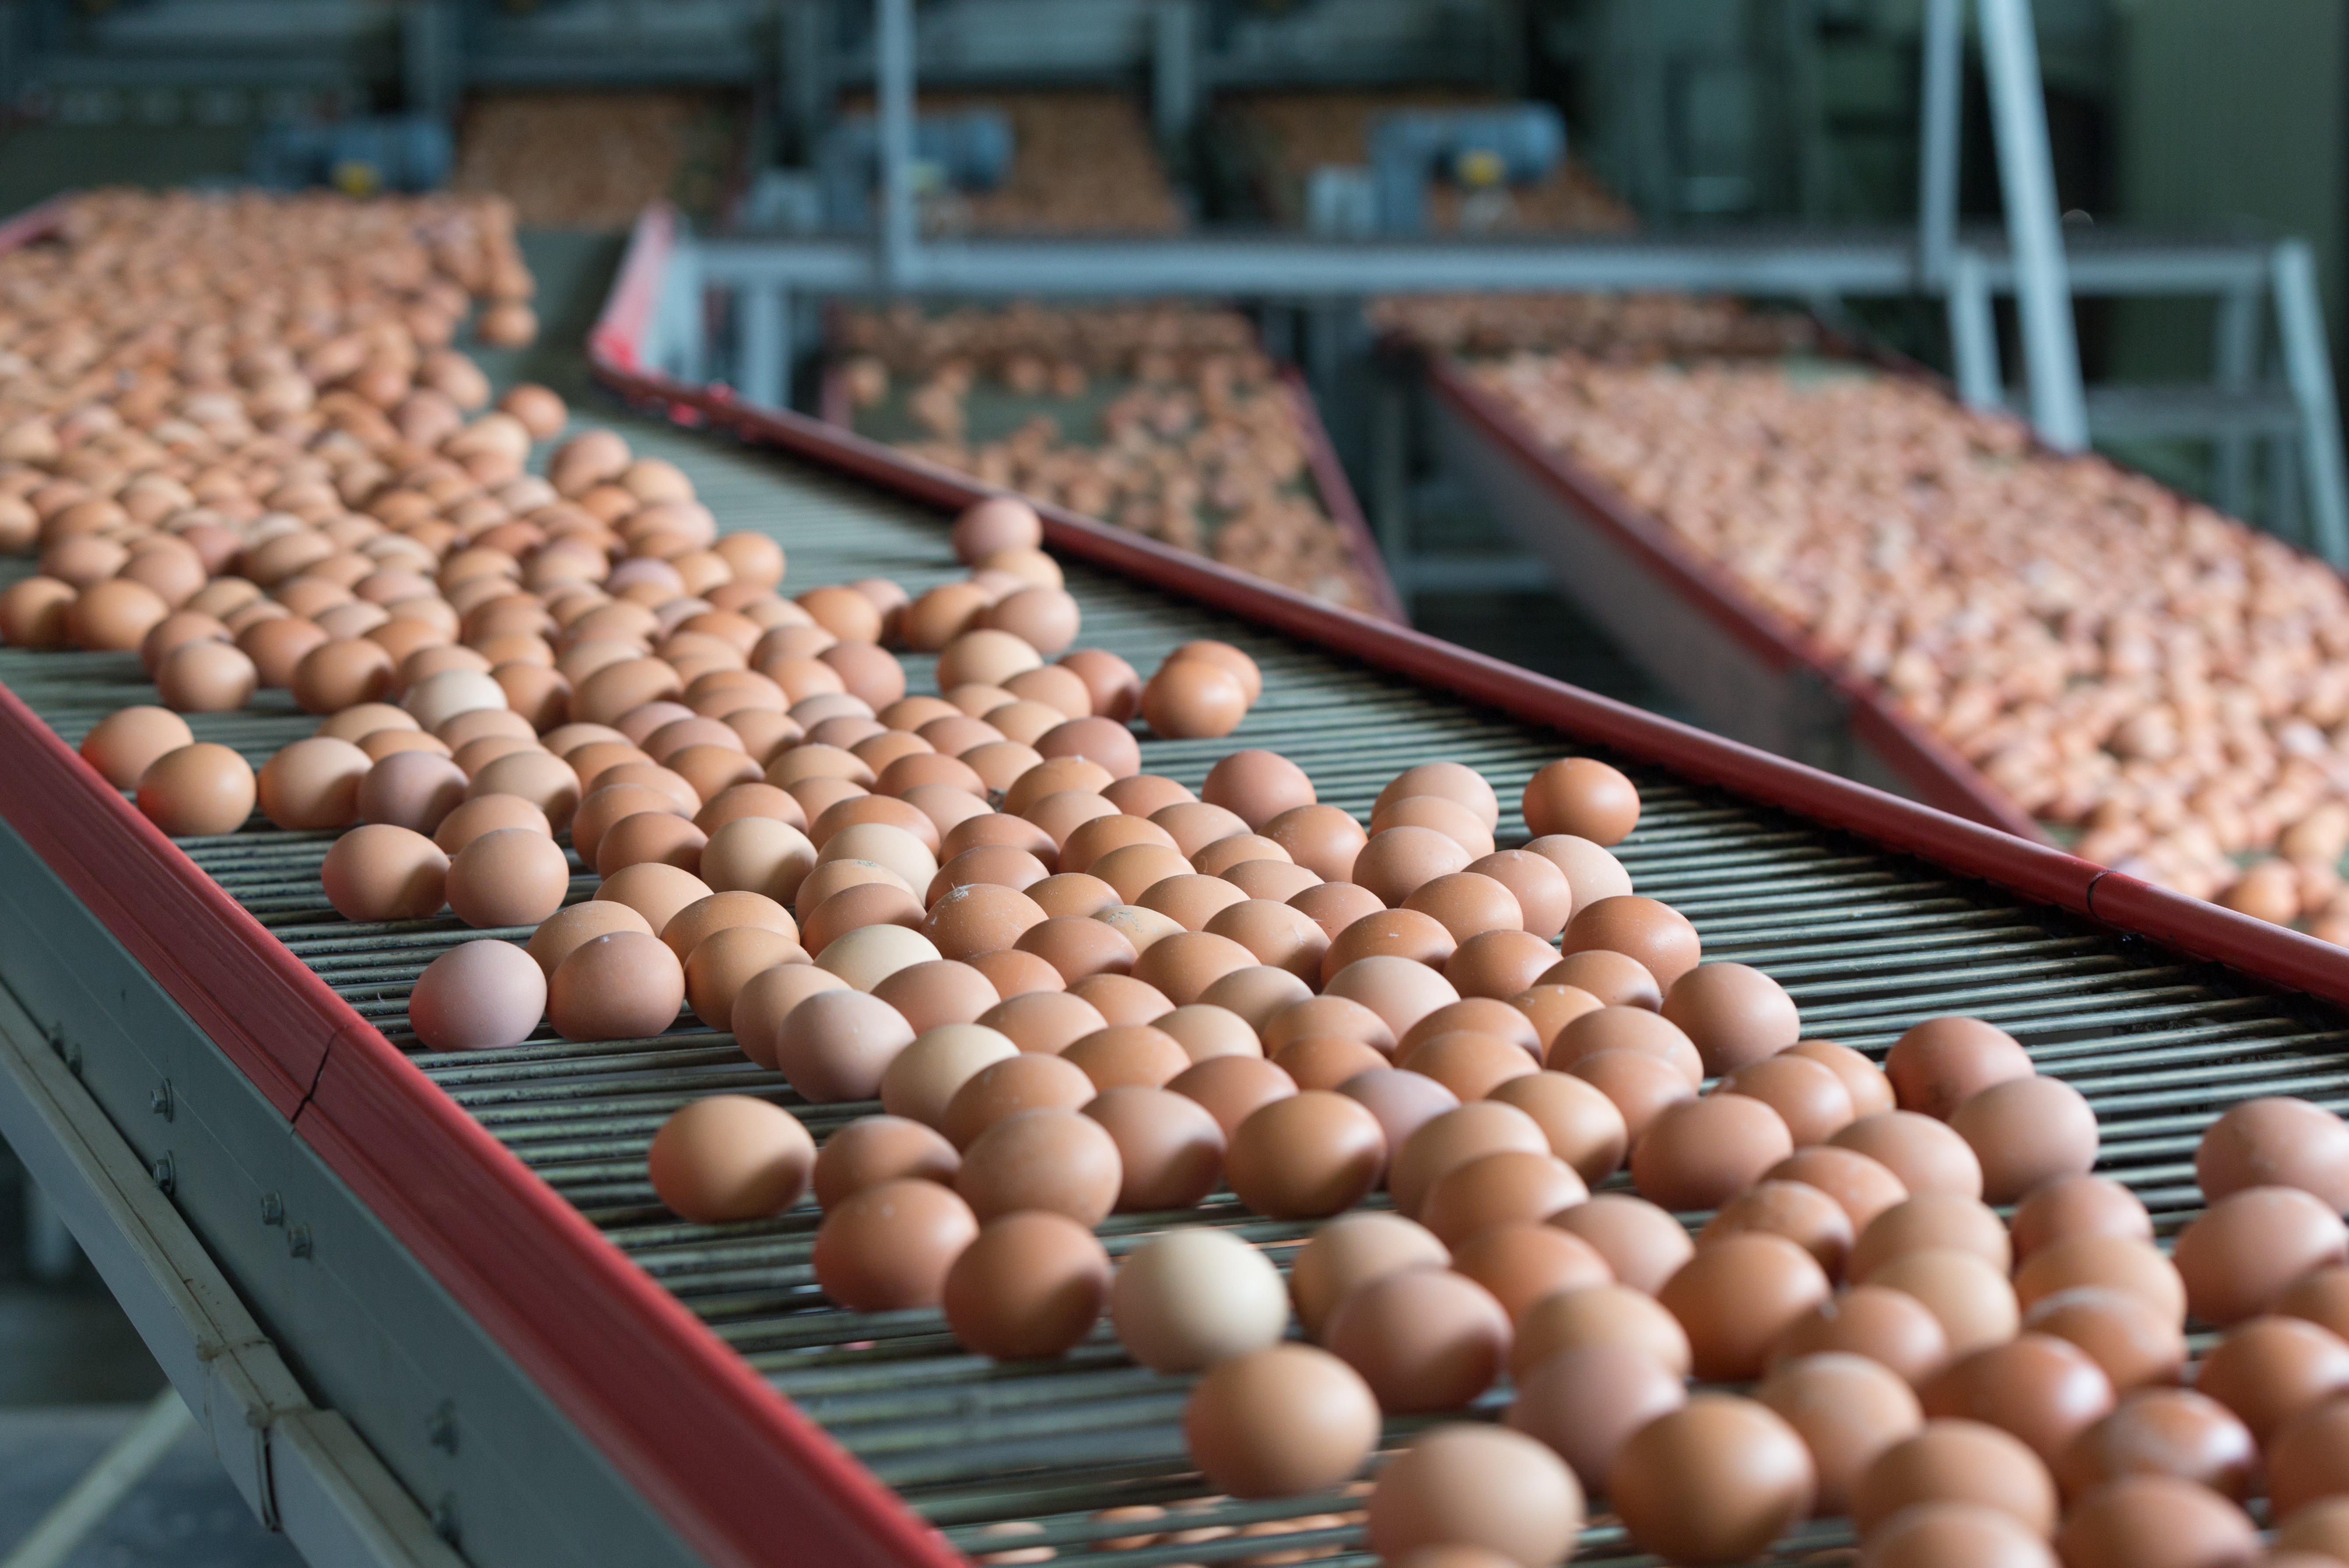 Thousands of eggs on conveyor belts in a factory